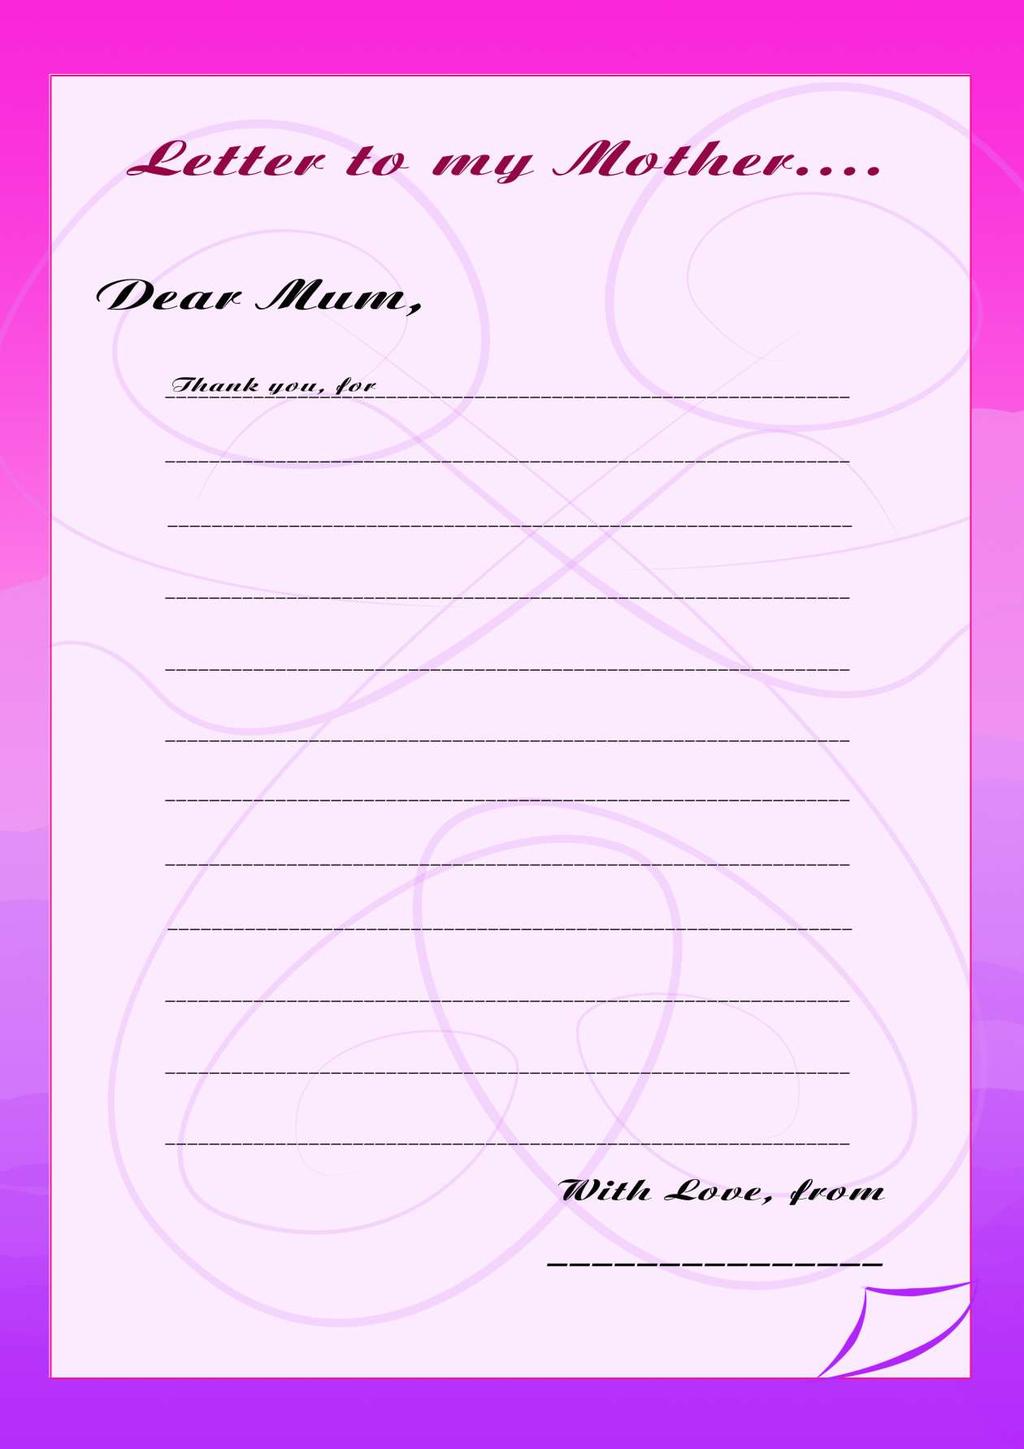 P Preteens MOTHER S DAY ACTIVITY PRETEENS (11-12YEARS) COMPLETE THIS LETTER TO YOUR MUM TELLING